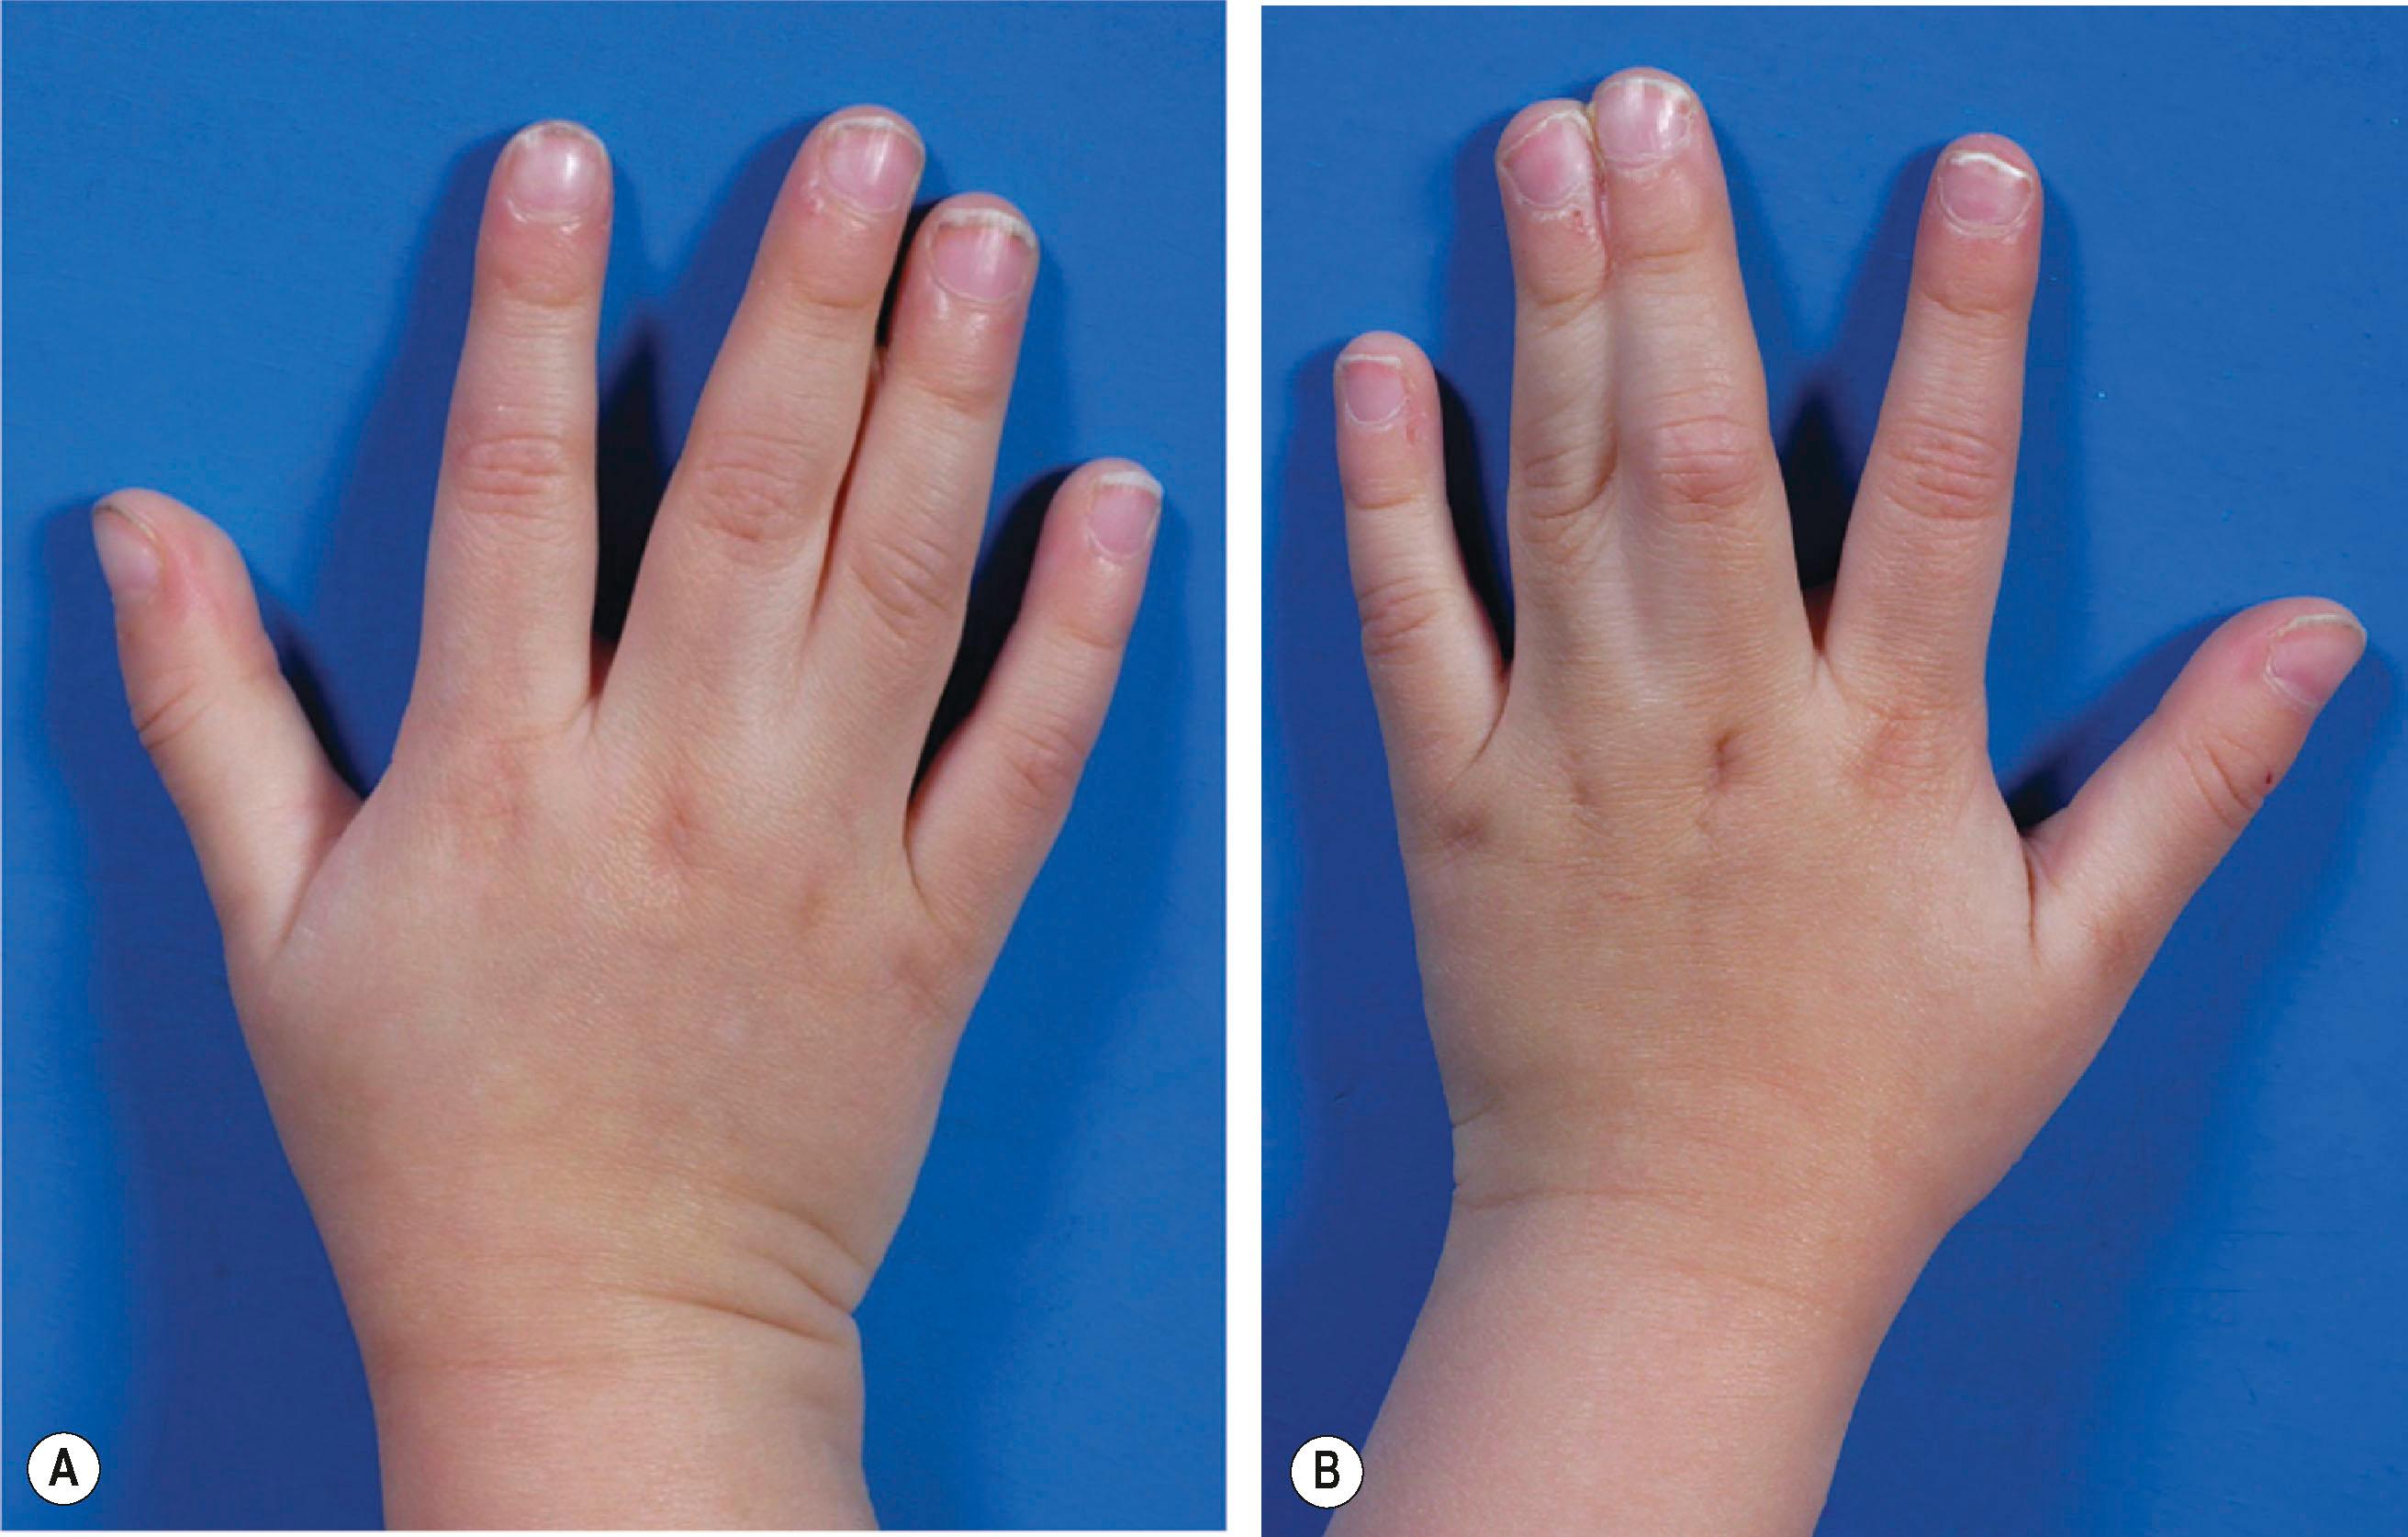 Figure 35.2, Incomplete syndactyly on the right hand and complete on the left in the same patient. (A) Pulp and nails are developed in a normal fashion. (B) Lateral nail folds on the syndactylized side are involved.